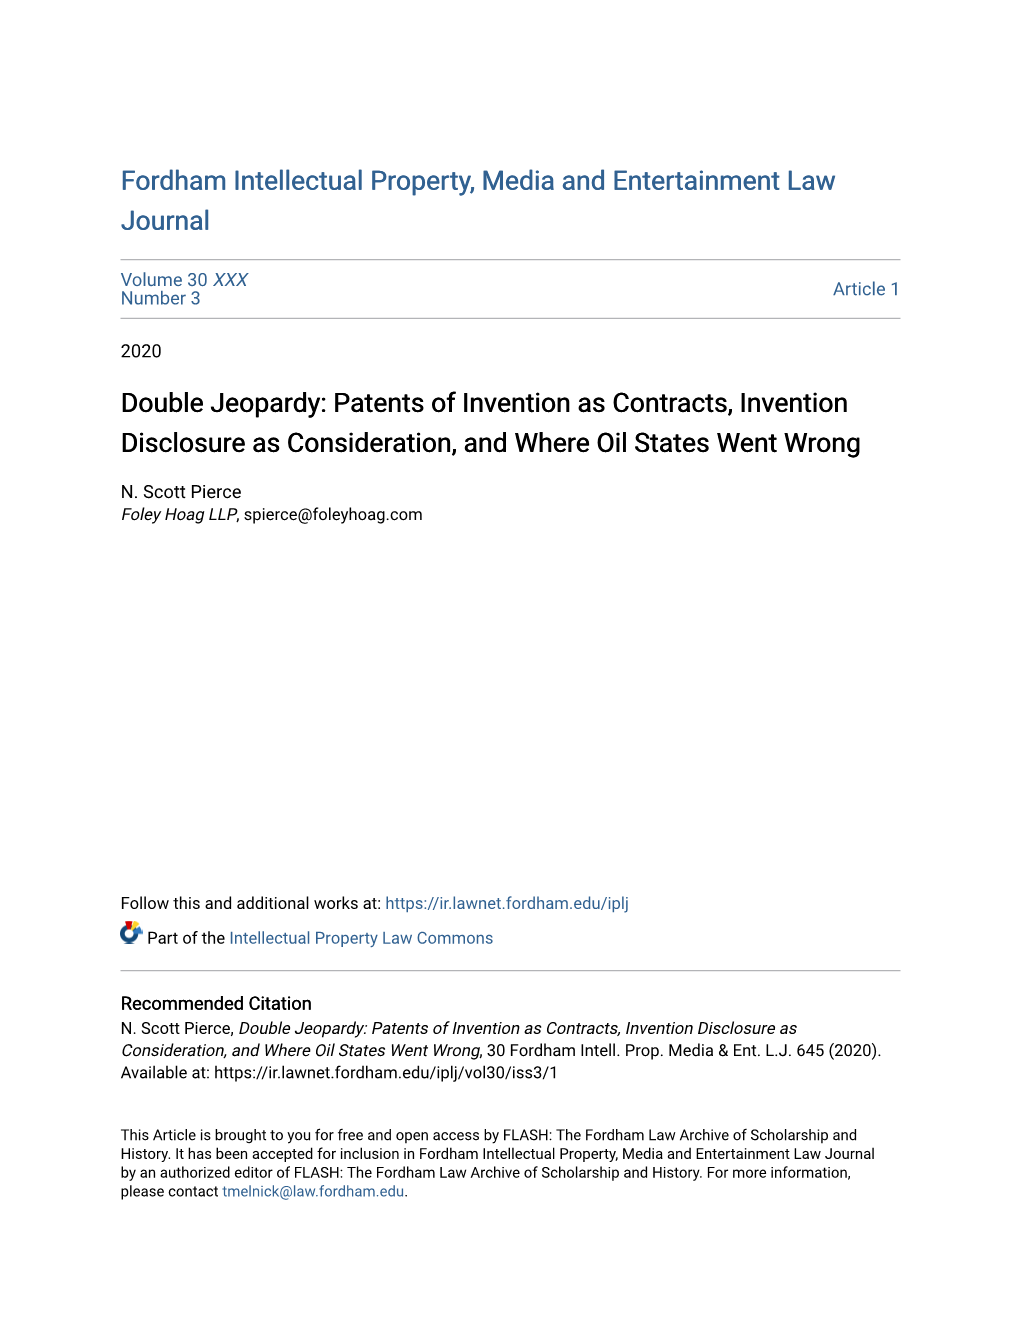 Double Jeopardy: Patents of Invention As Contracts, Invention Disclosure As Consideration, and Where Oil States Went Wrong